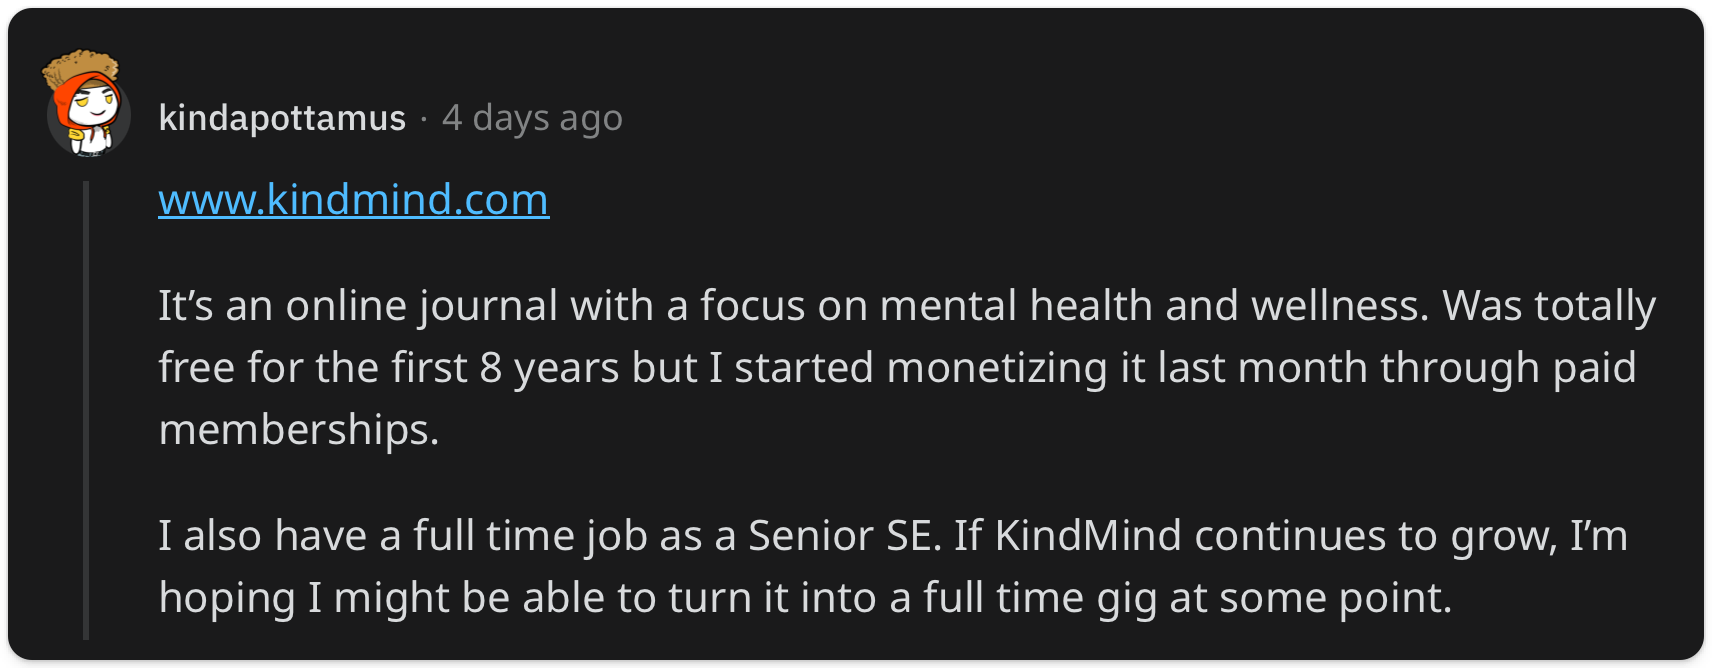 "Its an online journal with a focus on mental health and wellness. Was totally free for the first 8 years but I started monetizing it last month through paid memberships. I also have a full time job as a Senior SE. If KindMind continues to grow, Im hoping I might be able to turn it into a full time gig at some point."